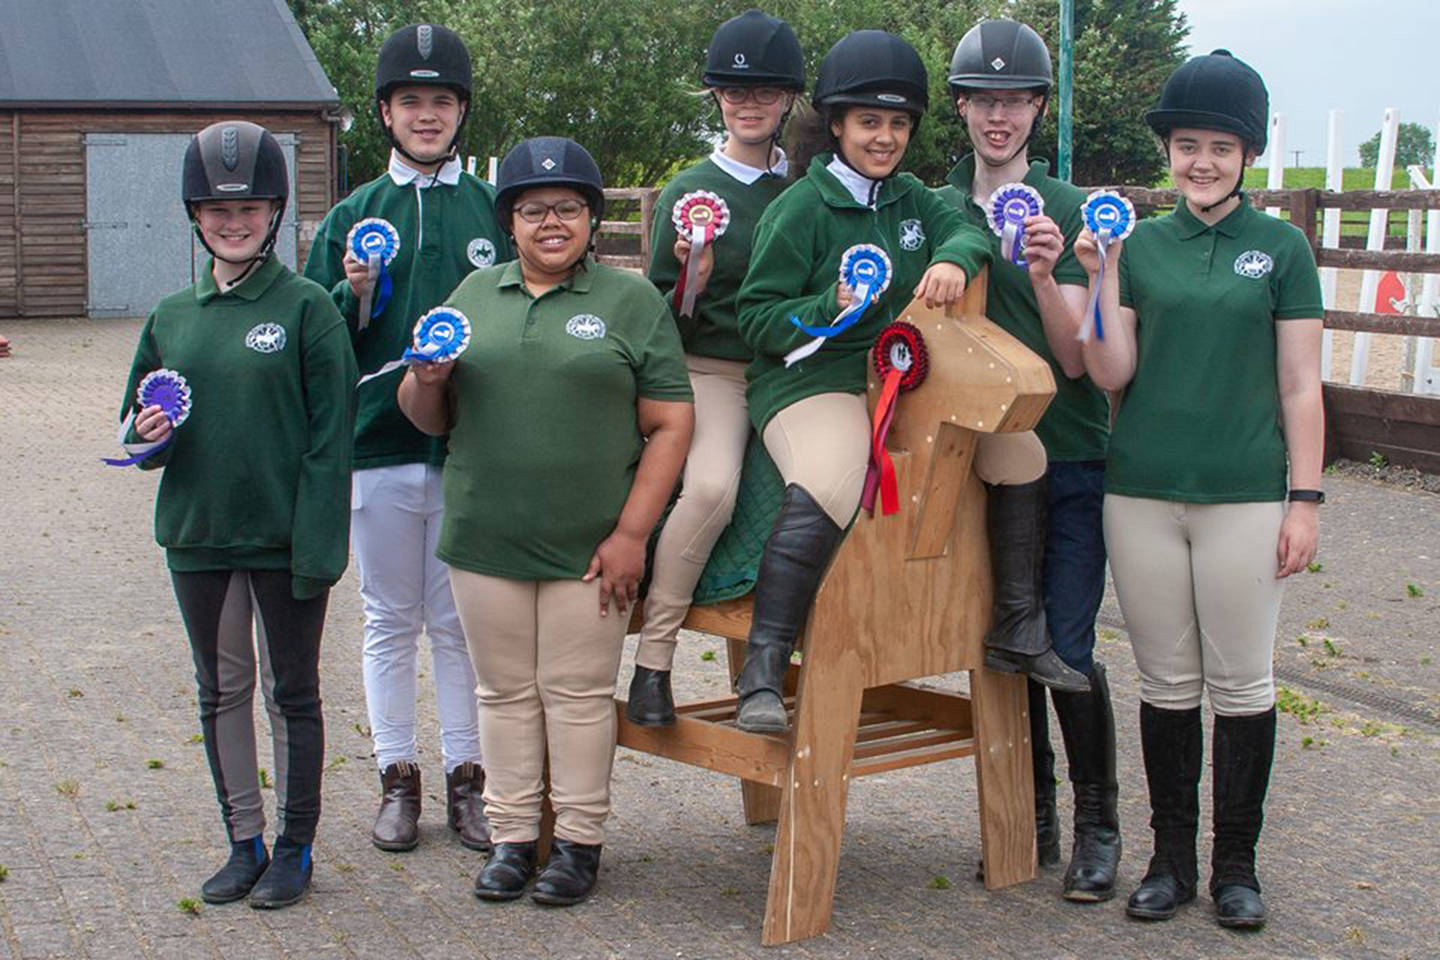 Phoebe sat at the front on a wooden horse with friends at Scropton RDA group